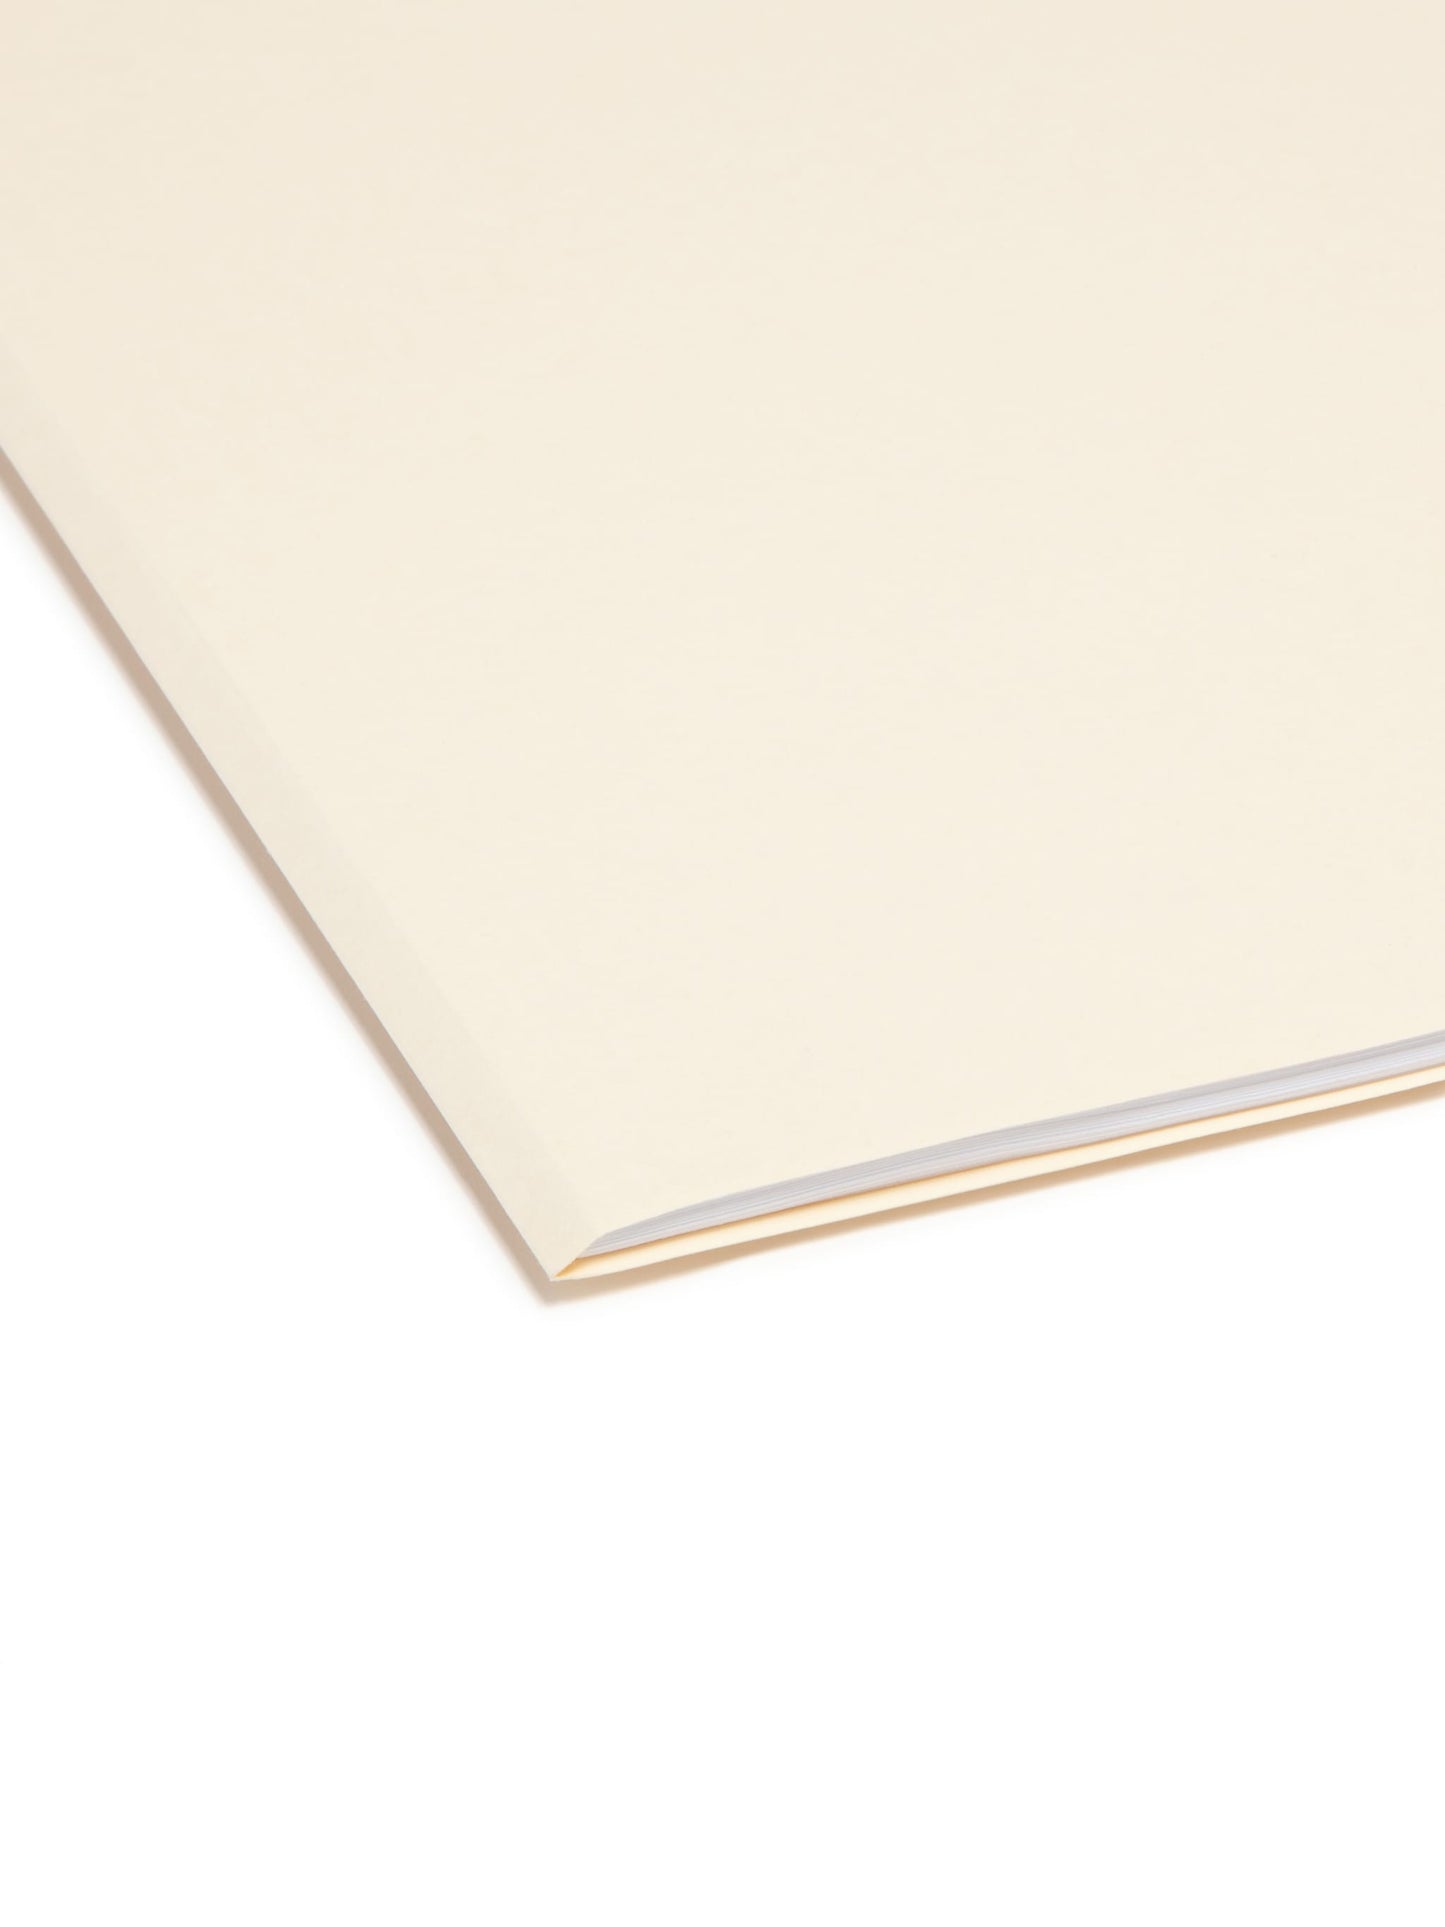 File Folders with Antimicrobial Product Protection, Manila Color, Letter Size, Set of 100, 086486103381